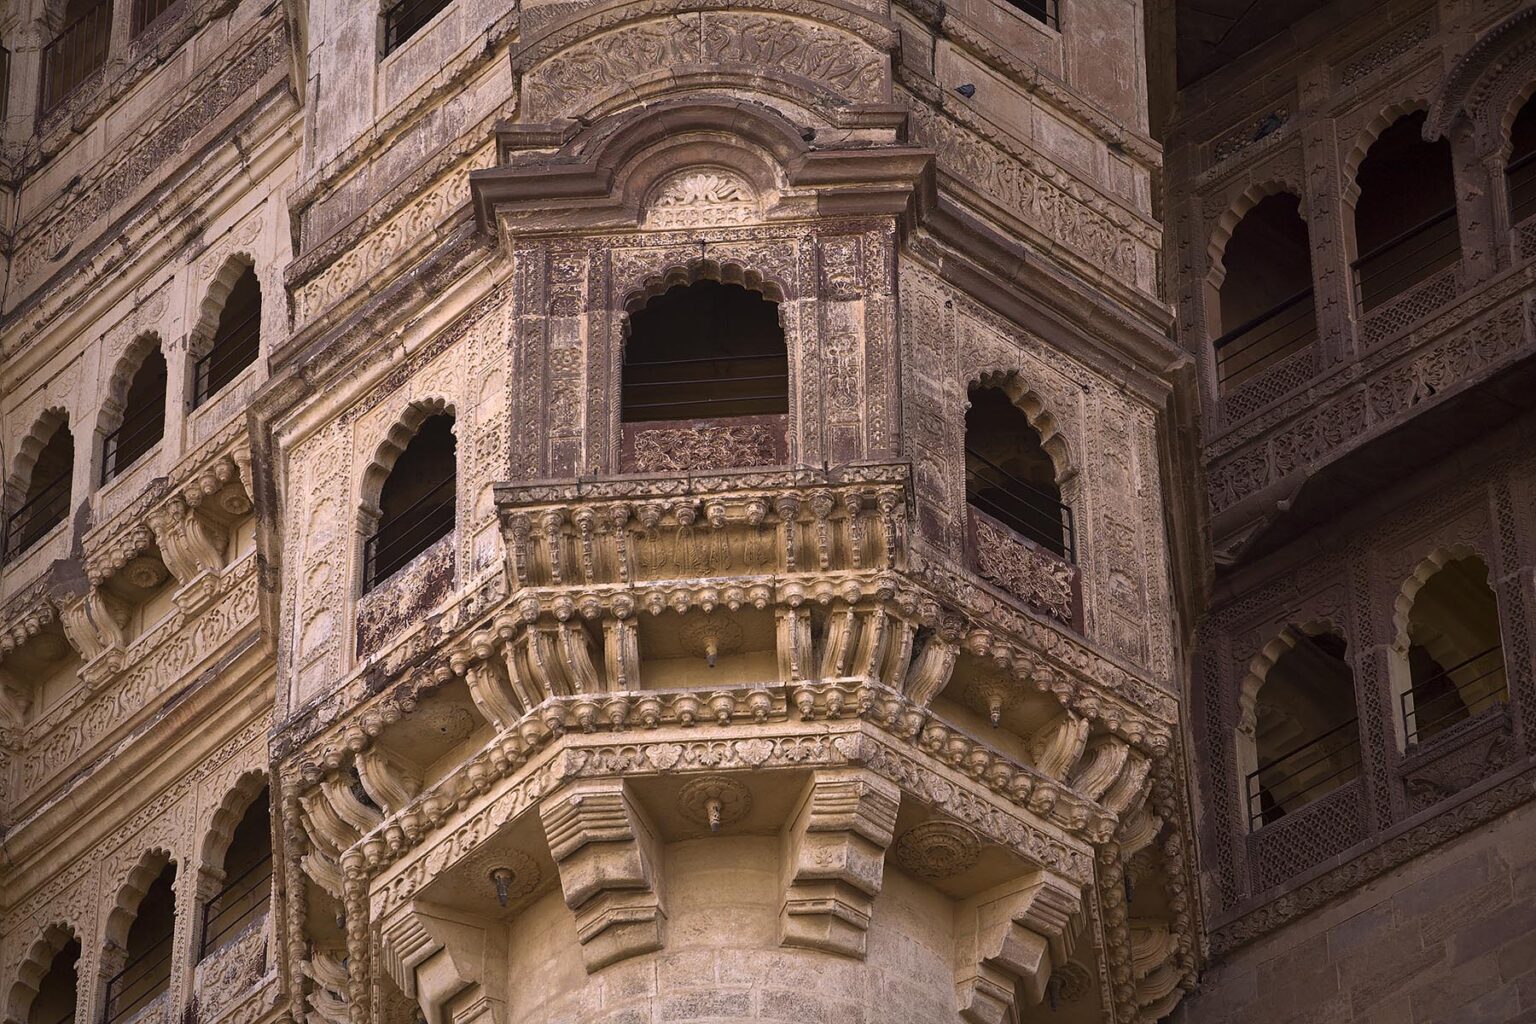 Stone carved  windows are an example of Rajput architecture at MEHERANGARH FORT in JOHDPUR - RAJASTHAN, INDIA